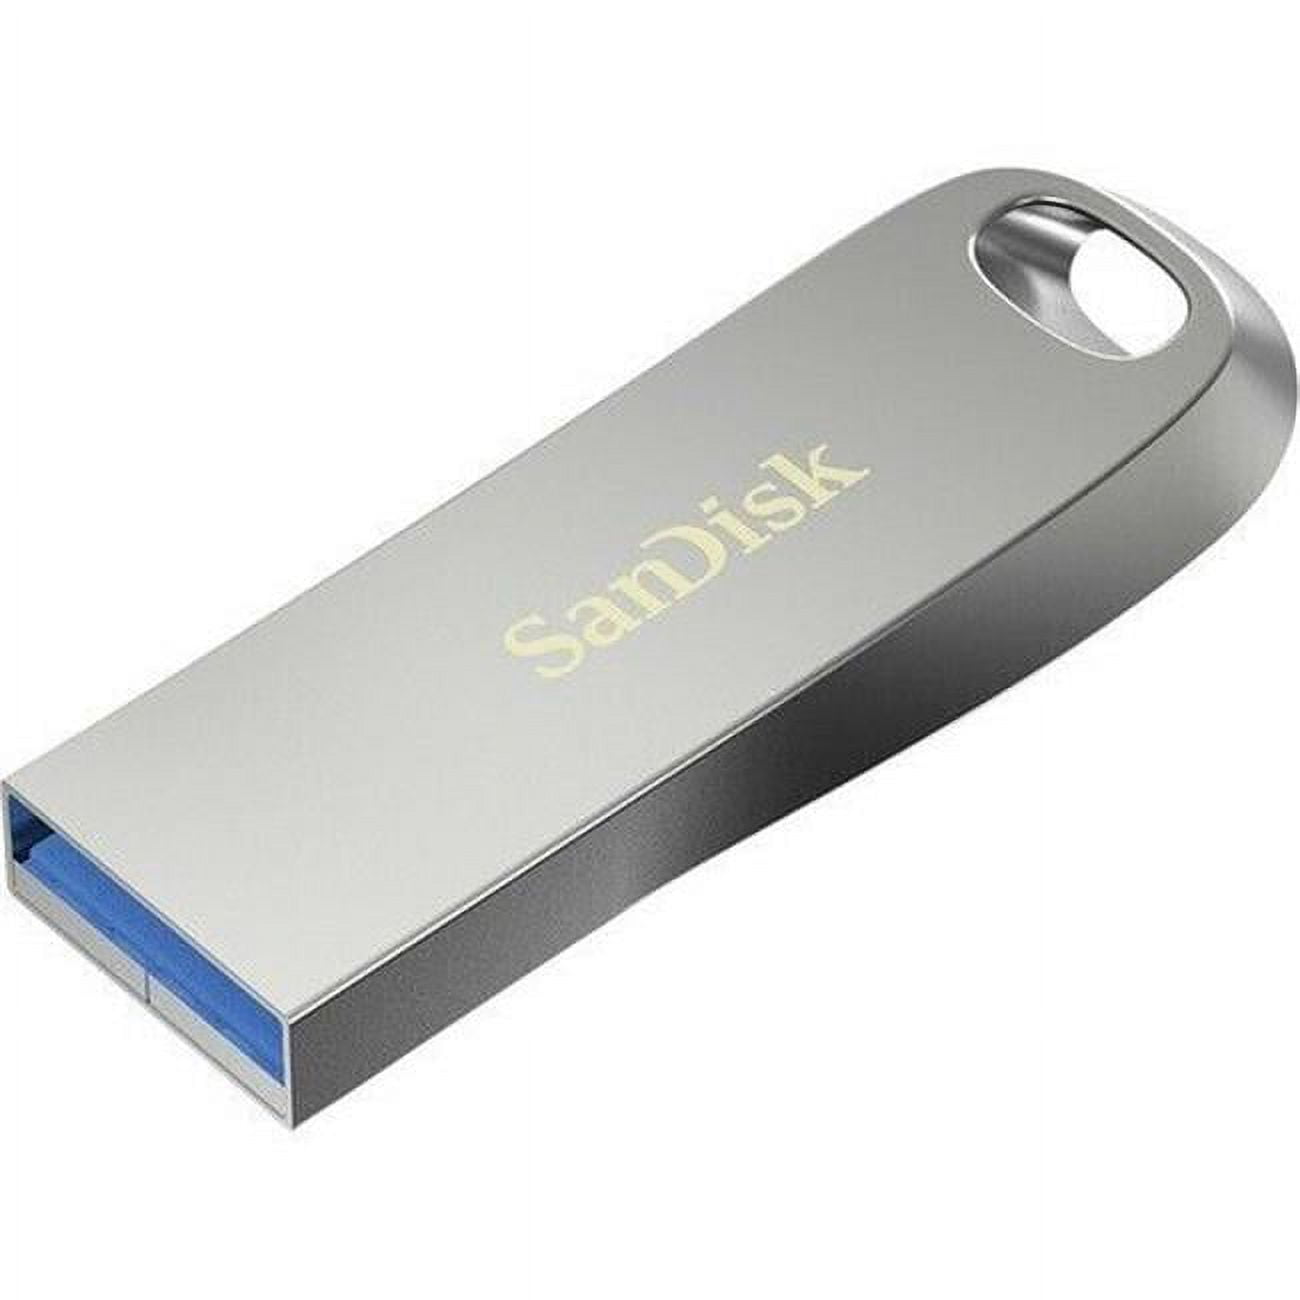 Picture of SanDisk SDCZ74-032G-A46 32GB Type A Ultra 3.1 Metal USB